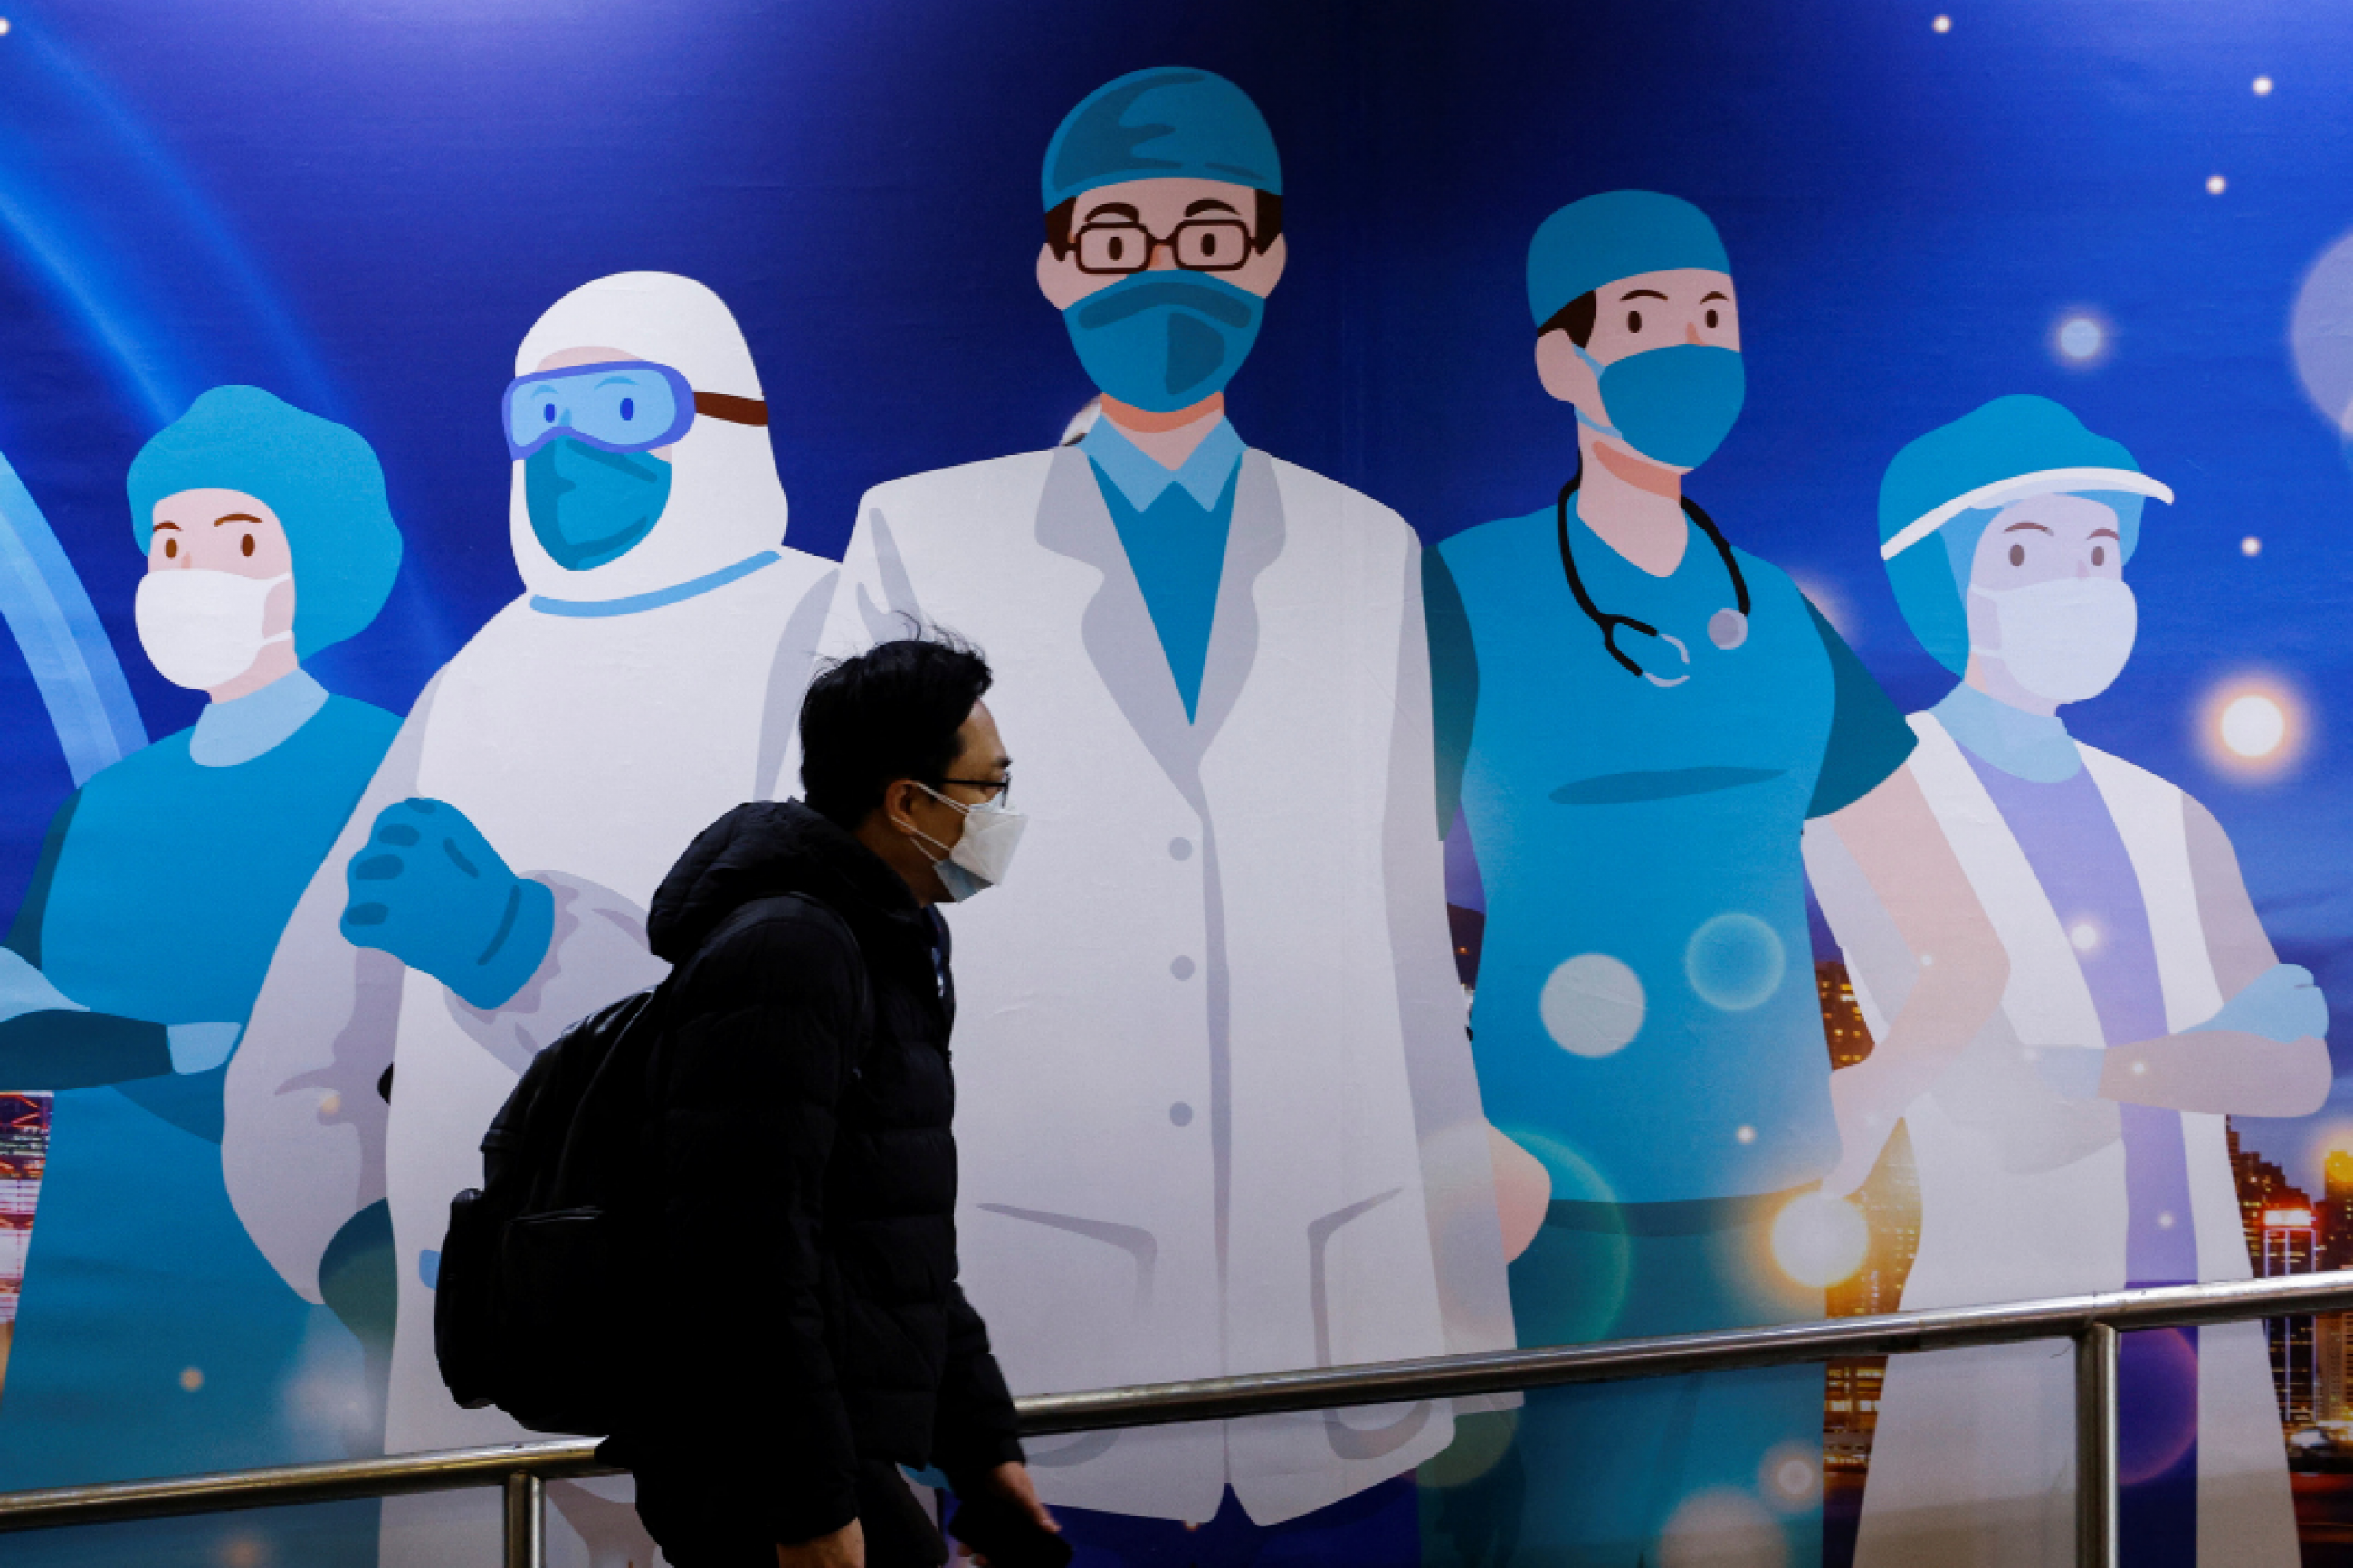 A man walks past street art supporting medical professionals during the COVID-19 outbreak in Hong Kong on February 24, 2022. Photo by REUTERS/Tyrone Siu